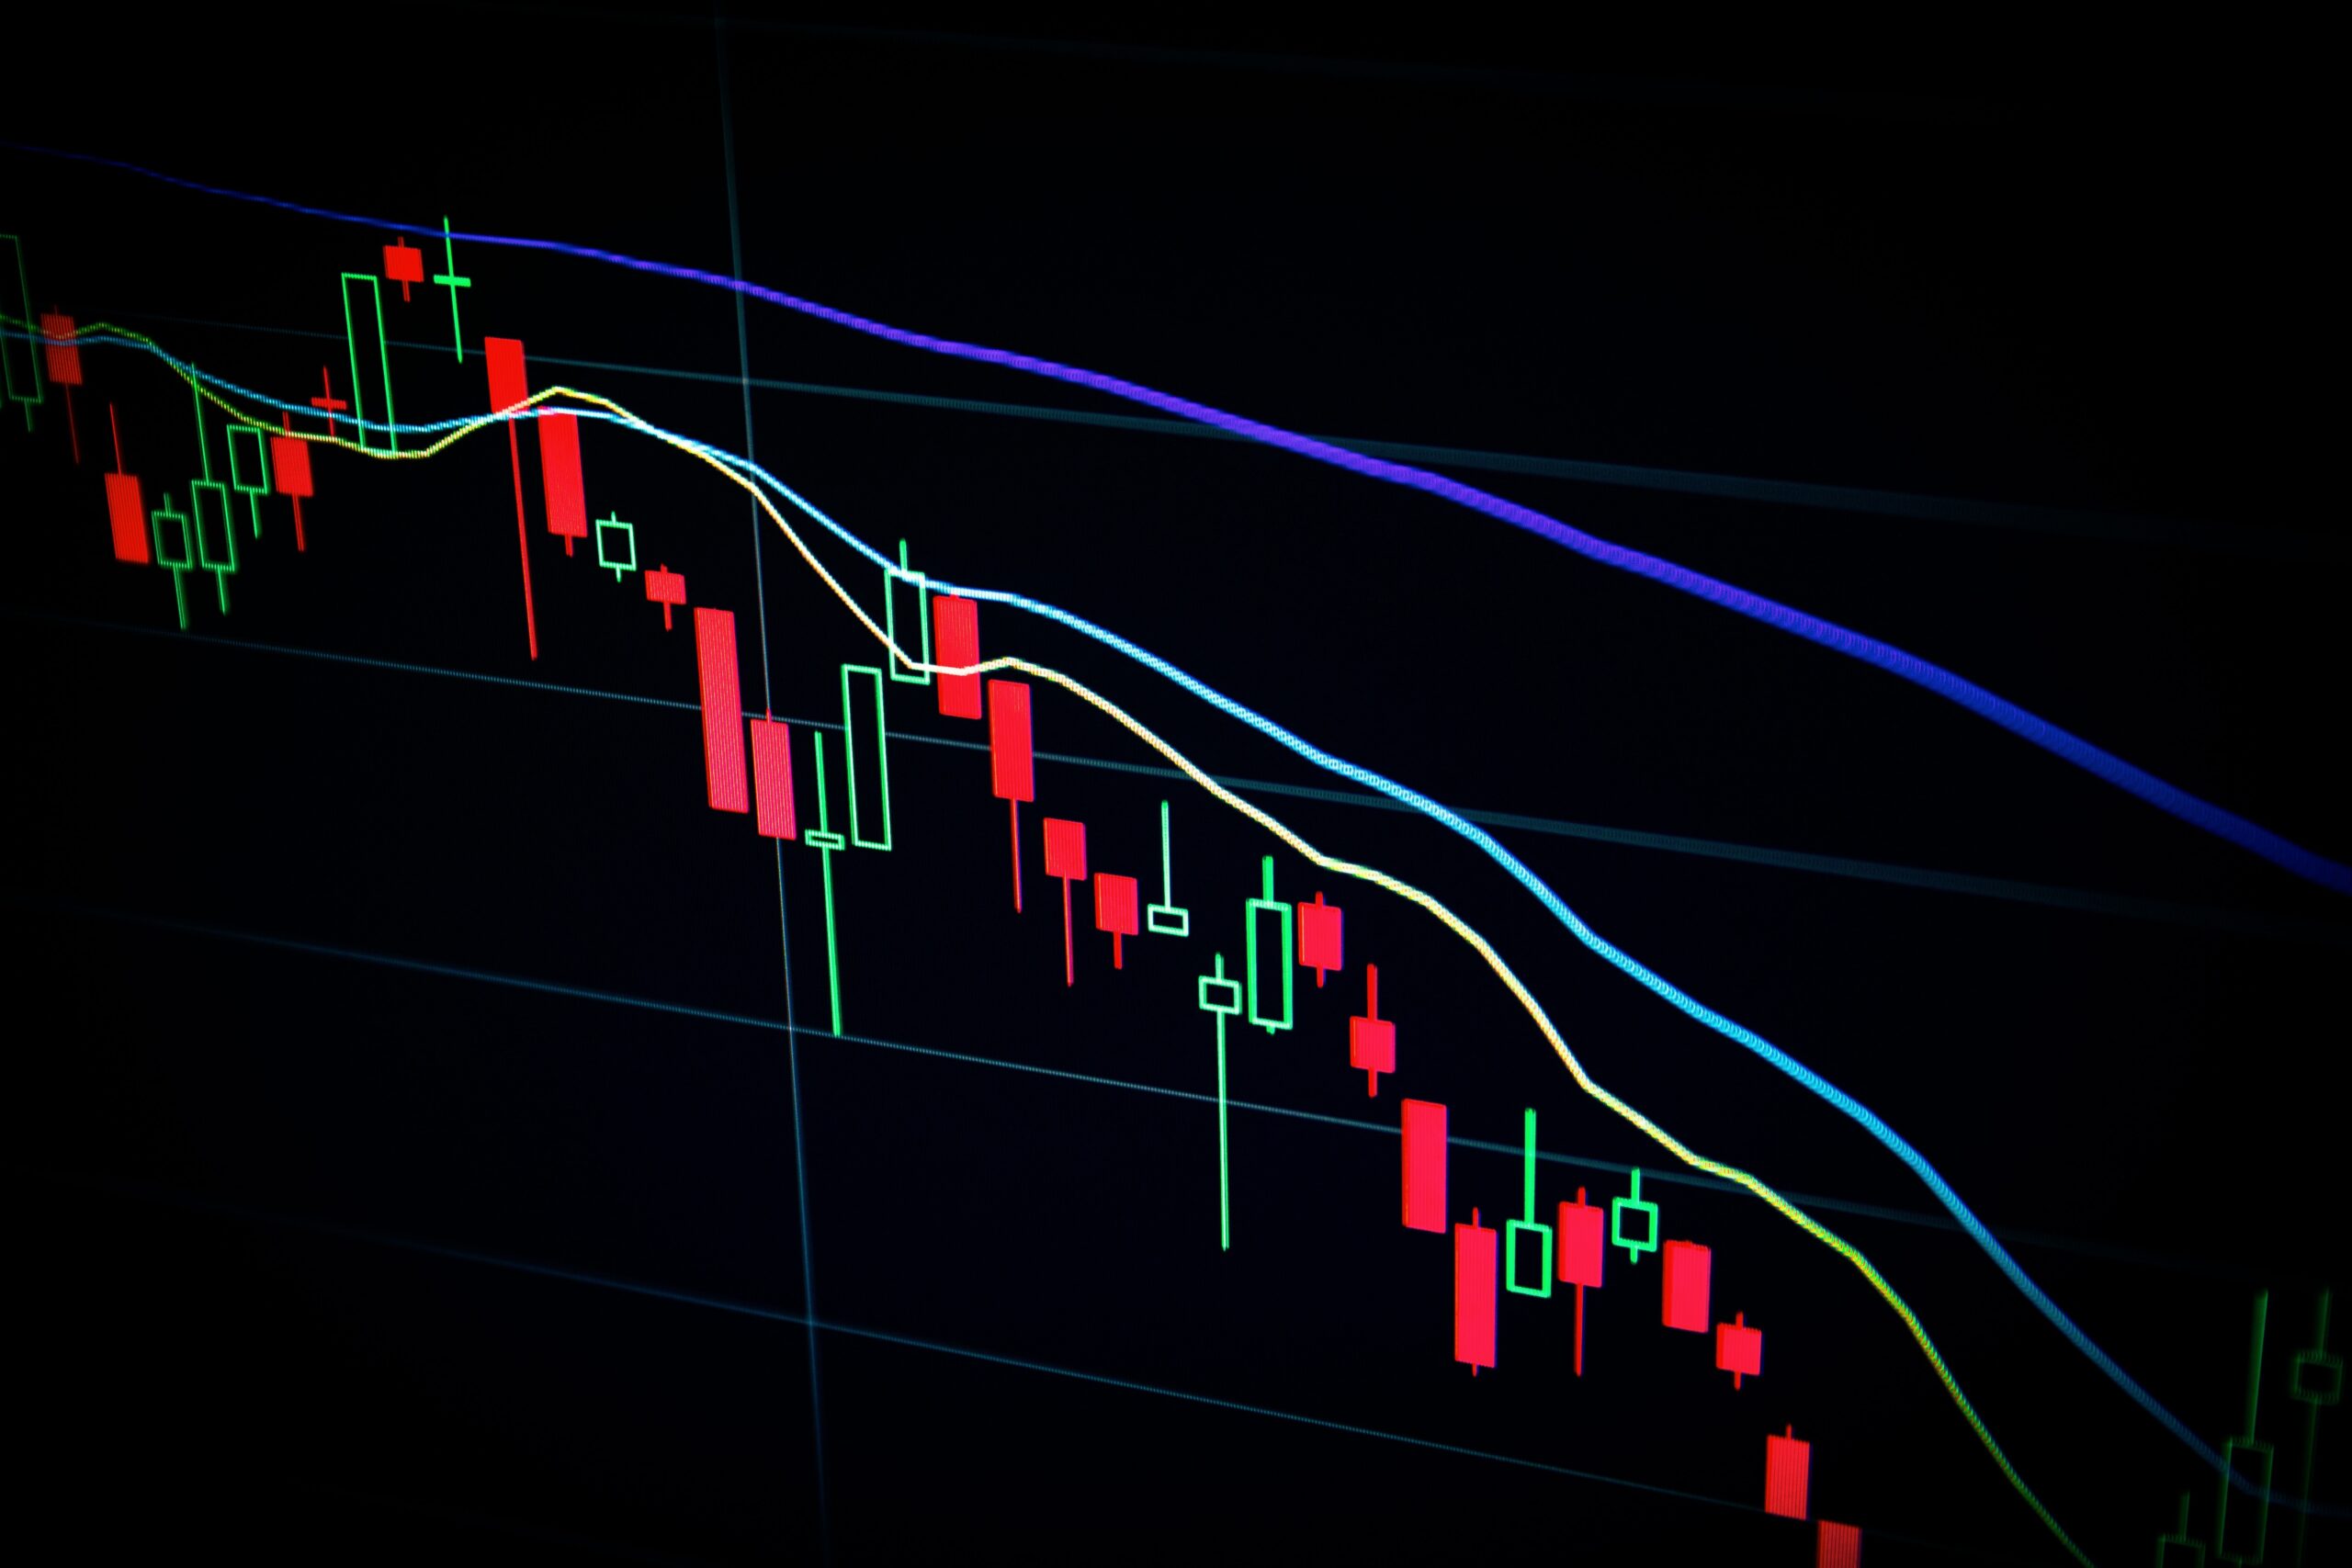 Bitcoin Trading Volume Declines, Rally Losing Steam Already?